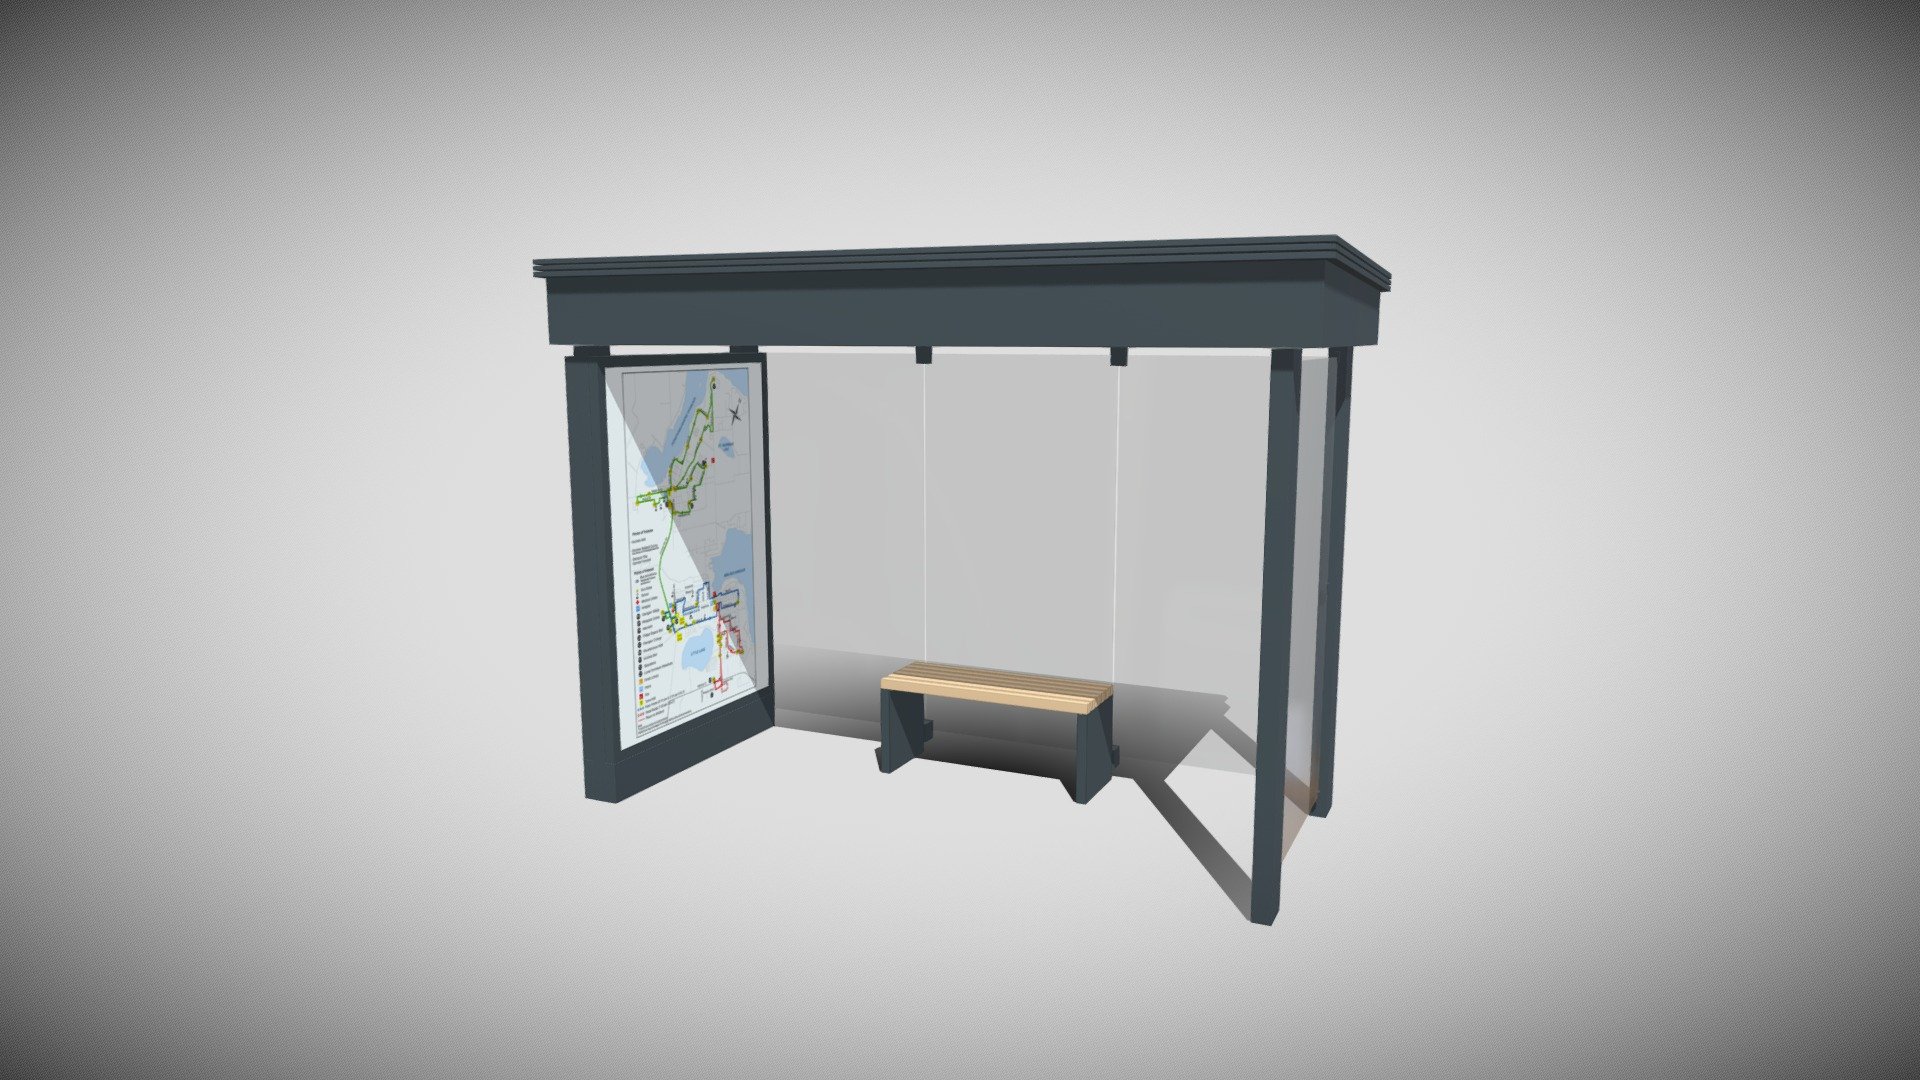 Detailed model of a Bus Stop Shelter, modeled in Cinema 4D.The model was created using approximate real world dimensions.

The model has 2,591 polys and 2,692 vertices.

An additional file has been provided containing the original Cinema 4D project files and other 3d export files such as 3ds, fbx and obj 3d model